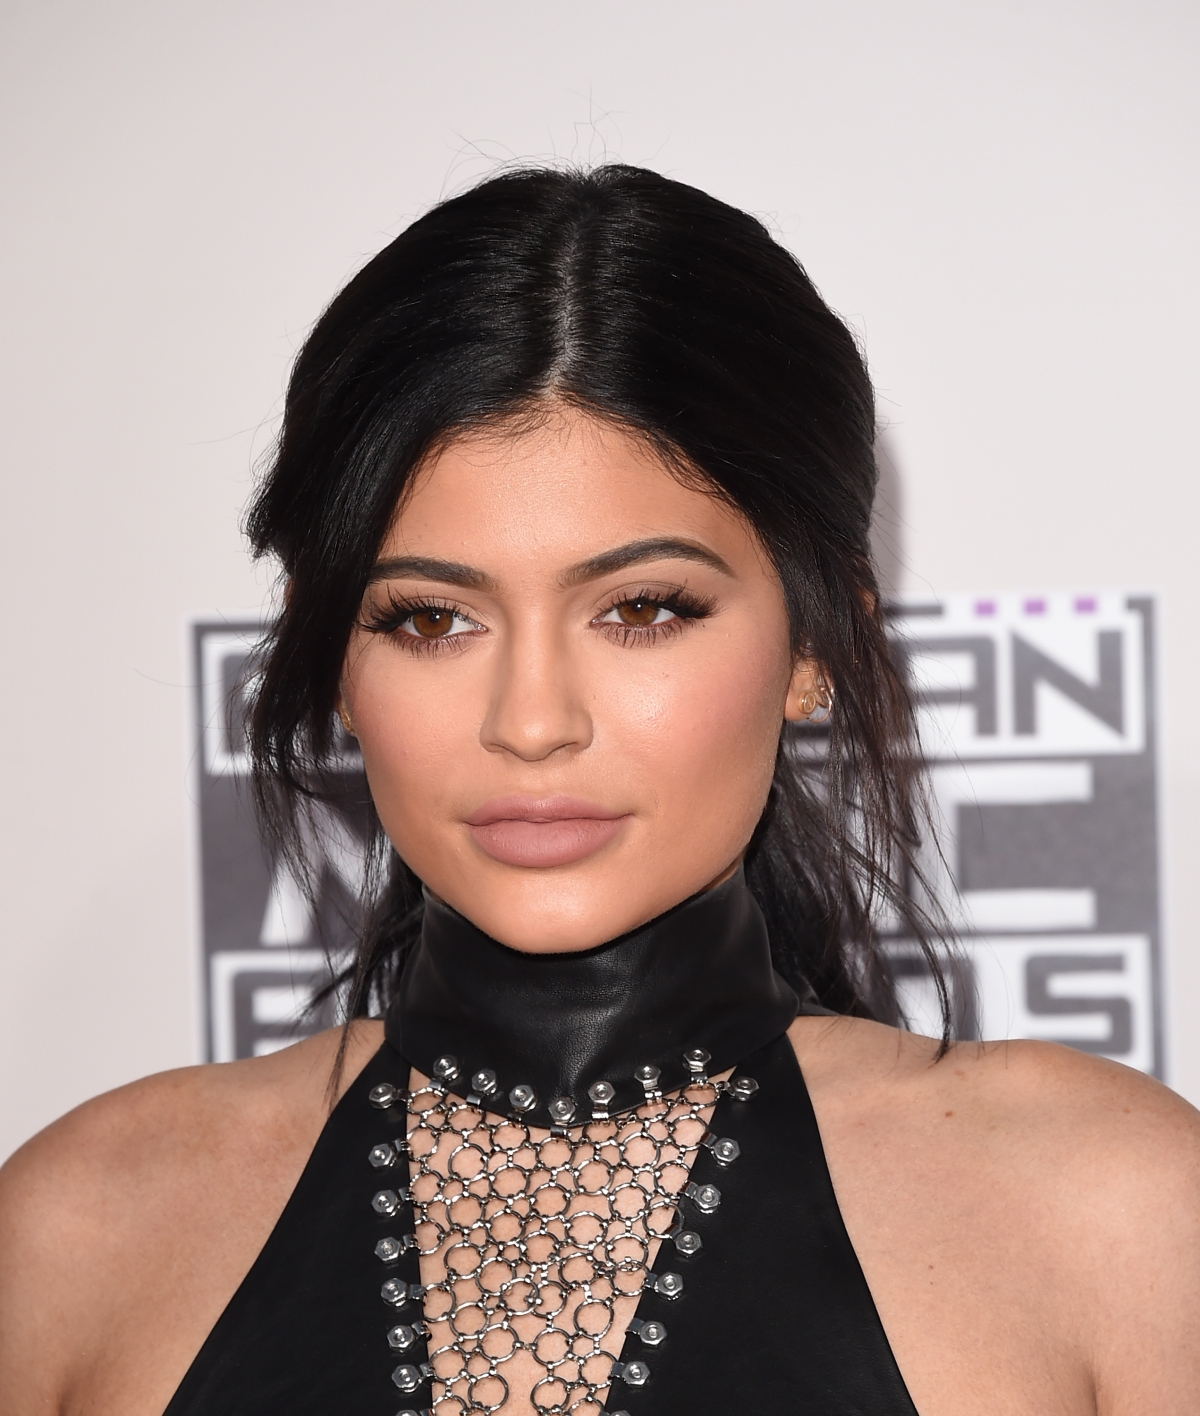 Kylie Jenner Lip Kit sells out in less than 60 seconds as website